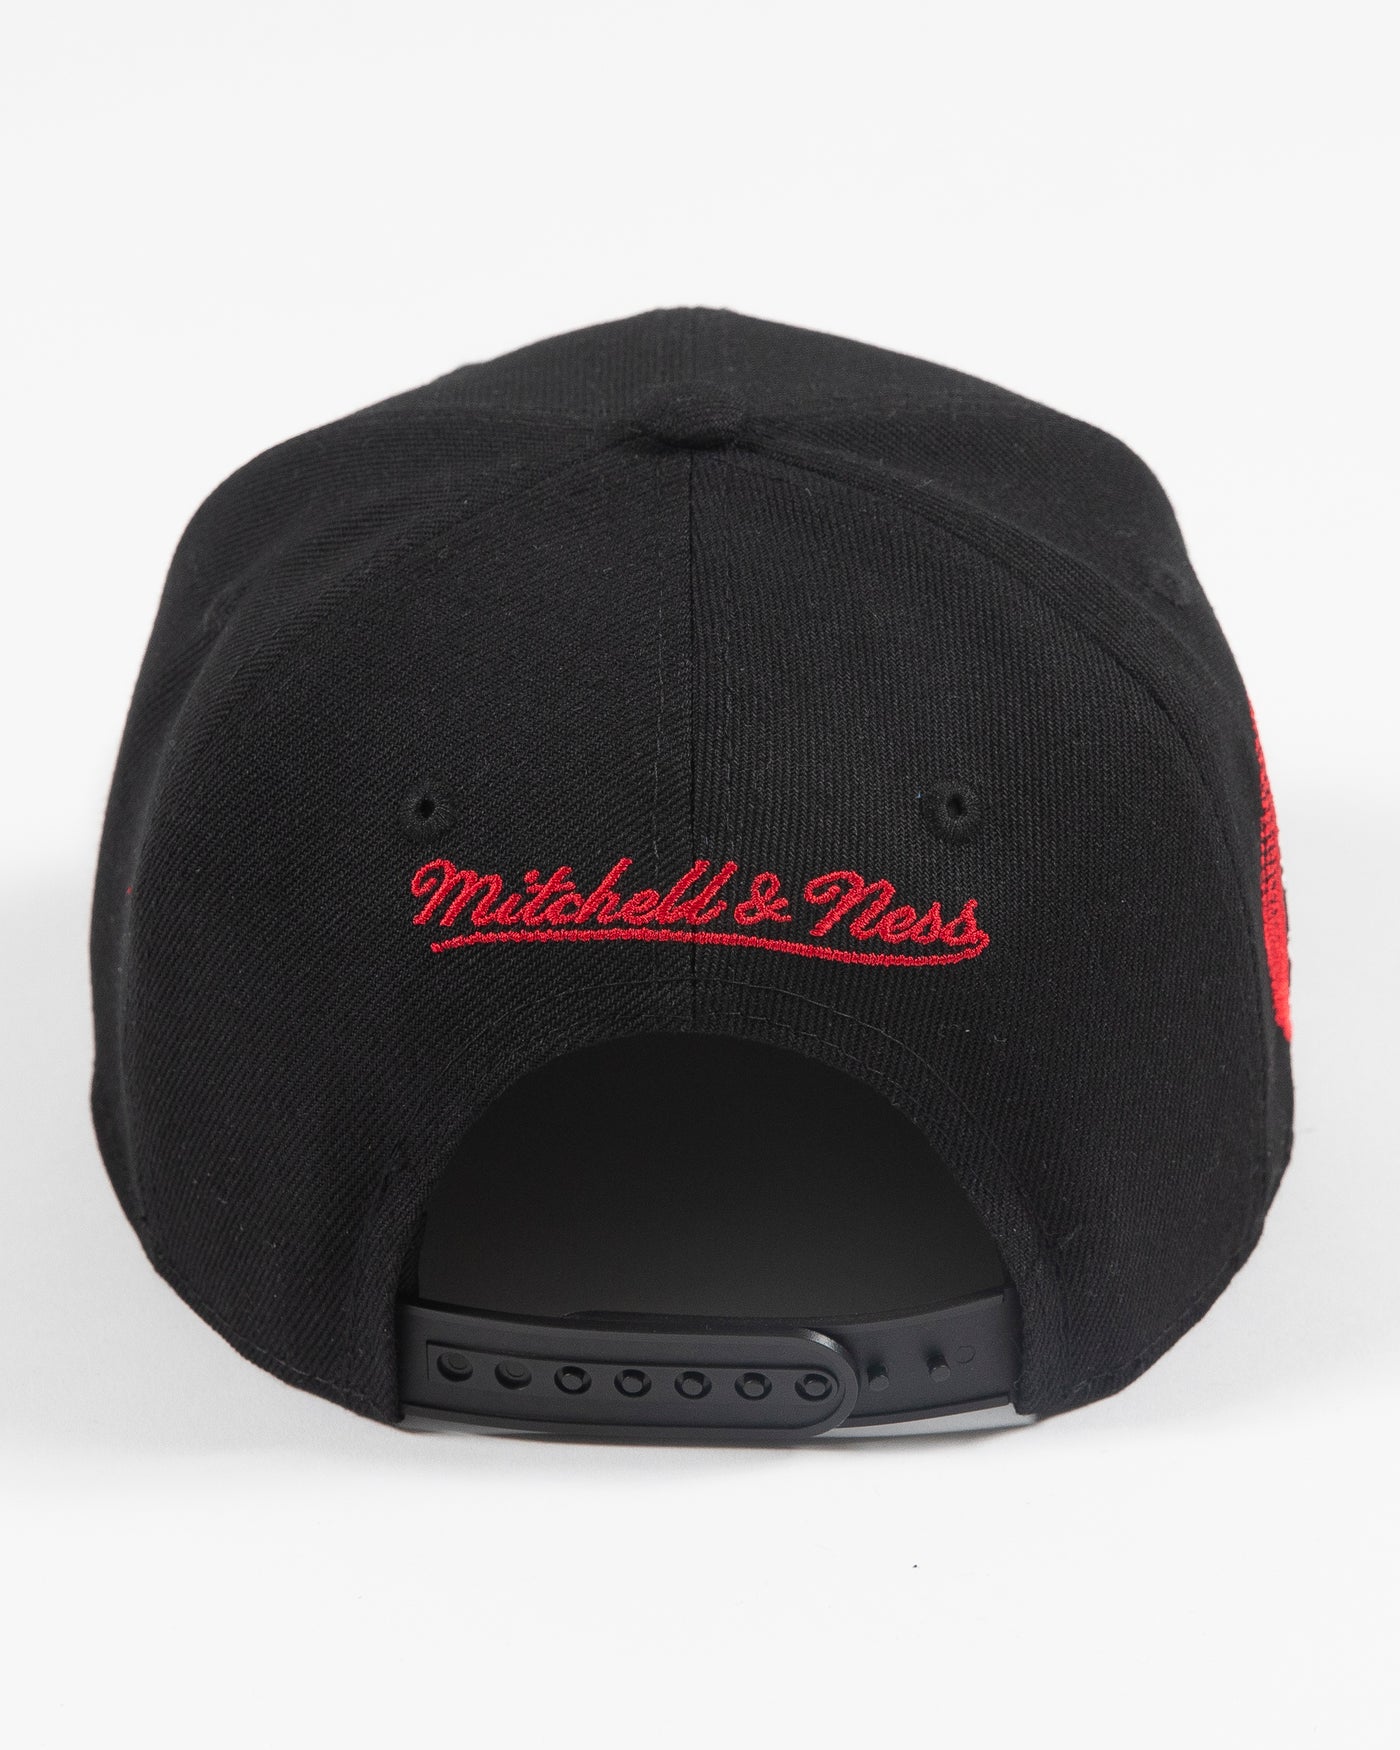 Mitchell & Ness Chicago Bulls Snapback Hat Adjustable Cap -  Black/Red/White/Side Patches